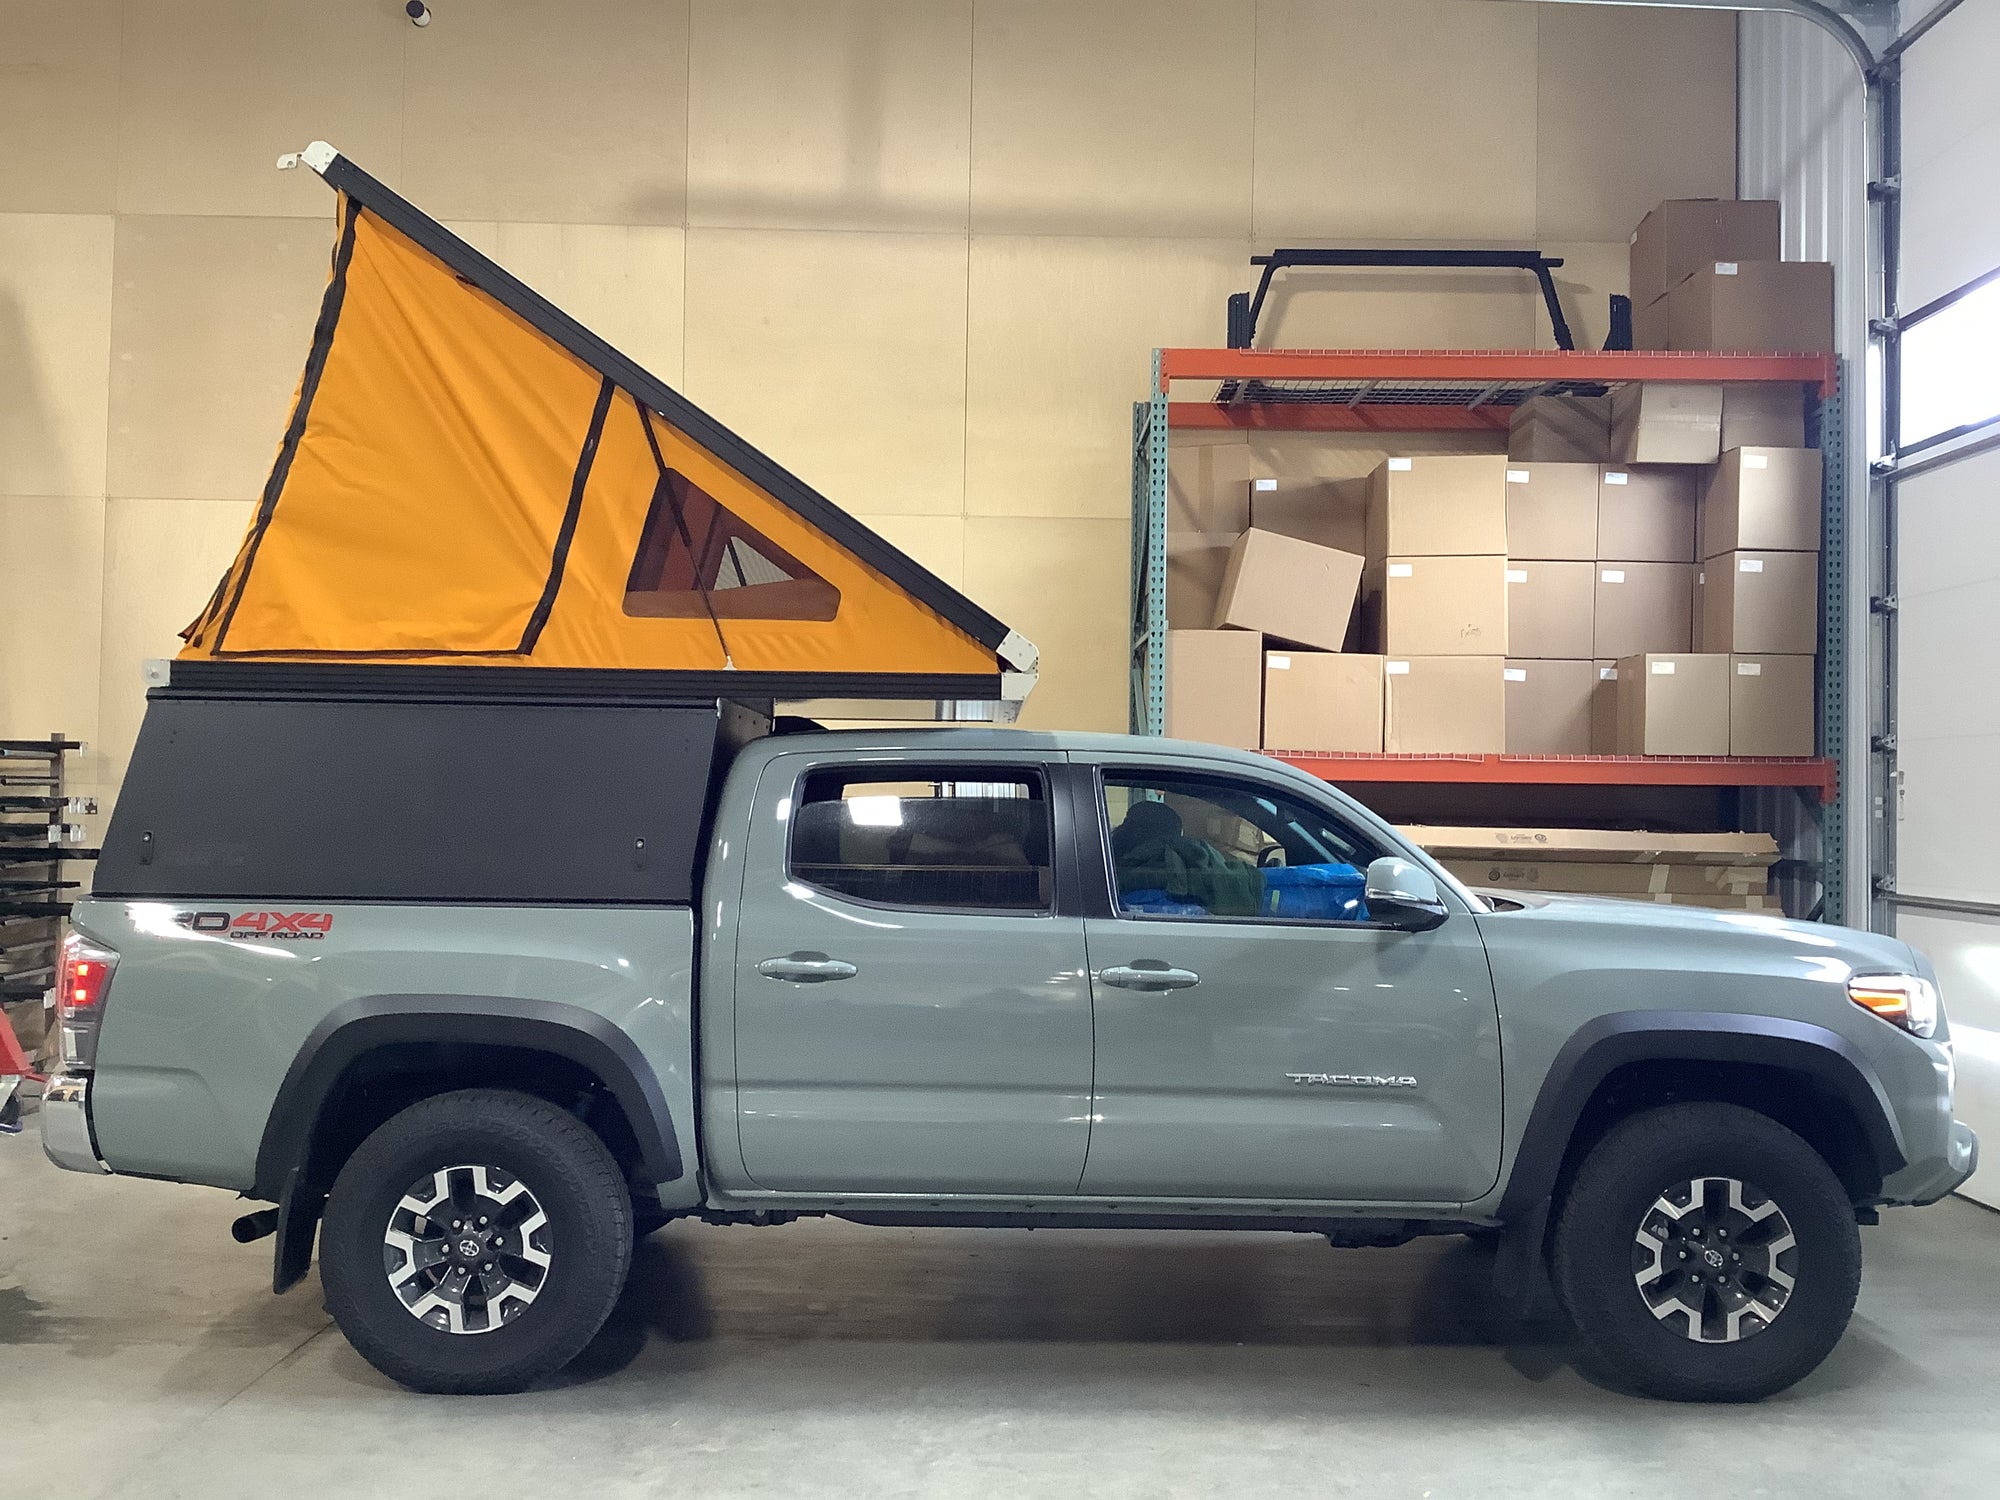 Toyota Tacoma-3621 - GoFastCampers